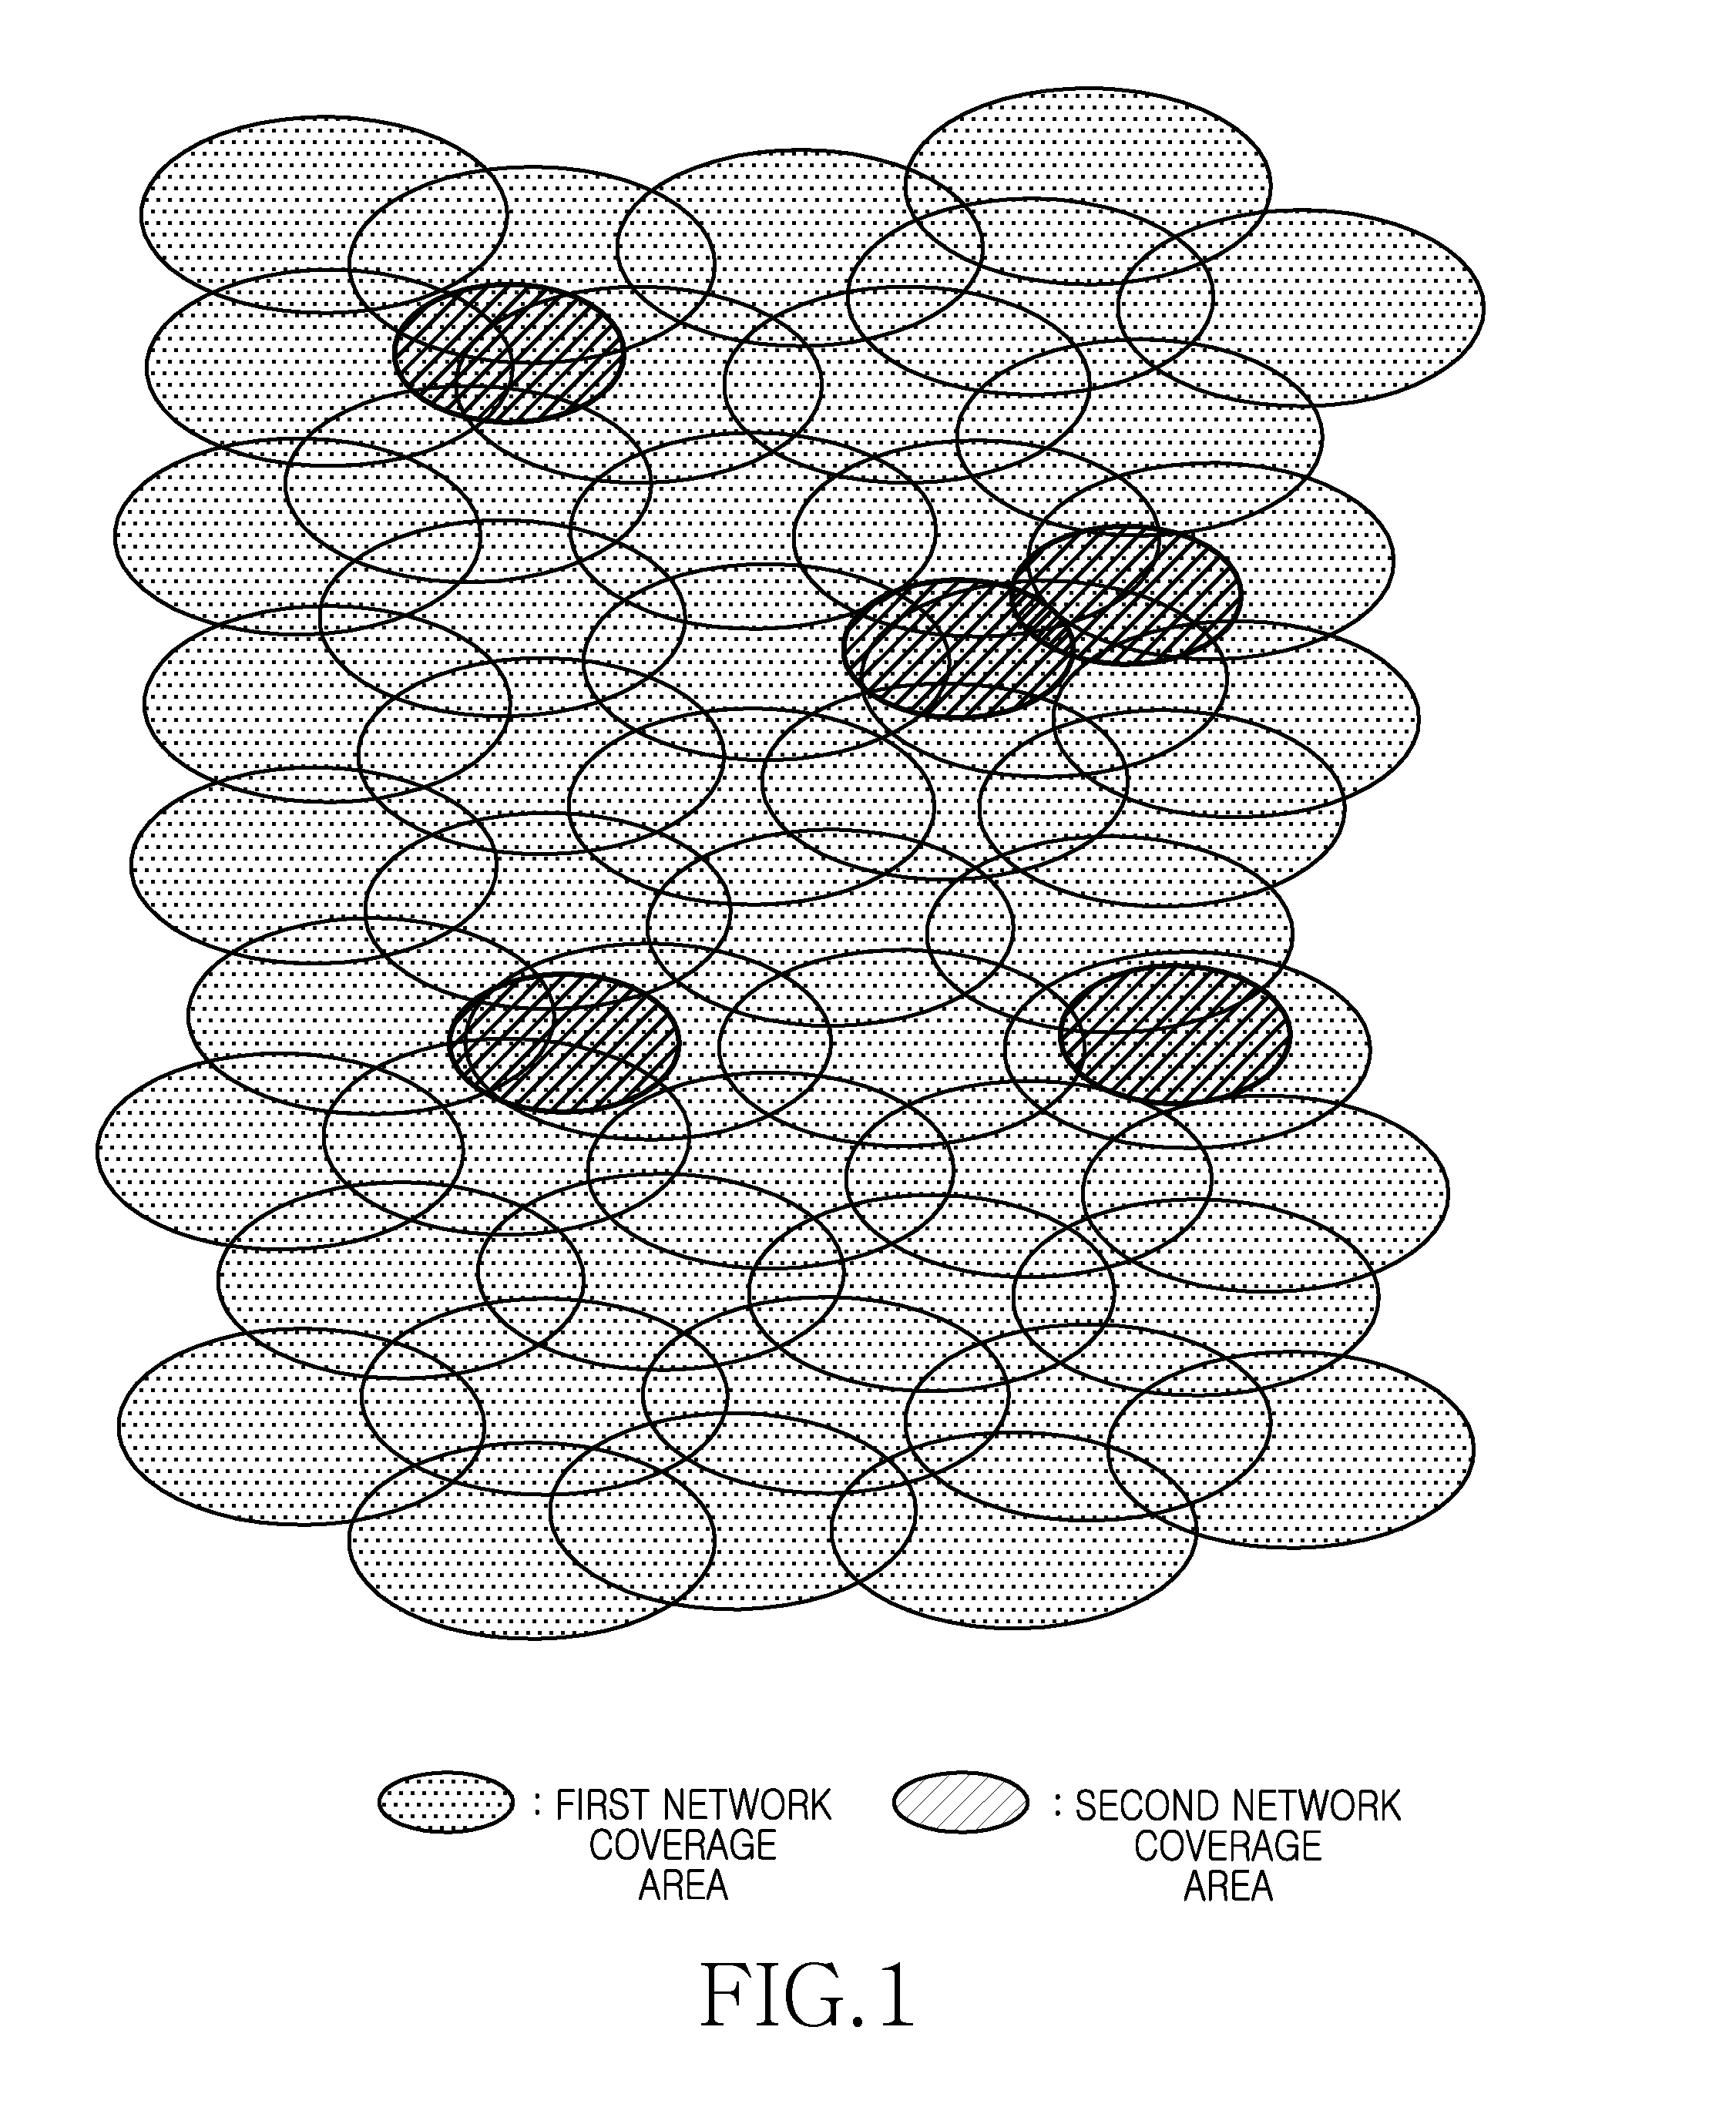 Apparatus and method for providing voice call continuity using different networks in wireless communication system